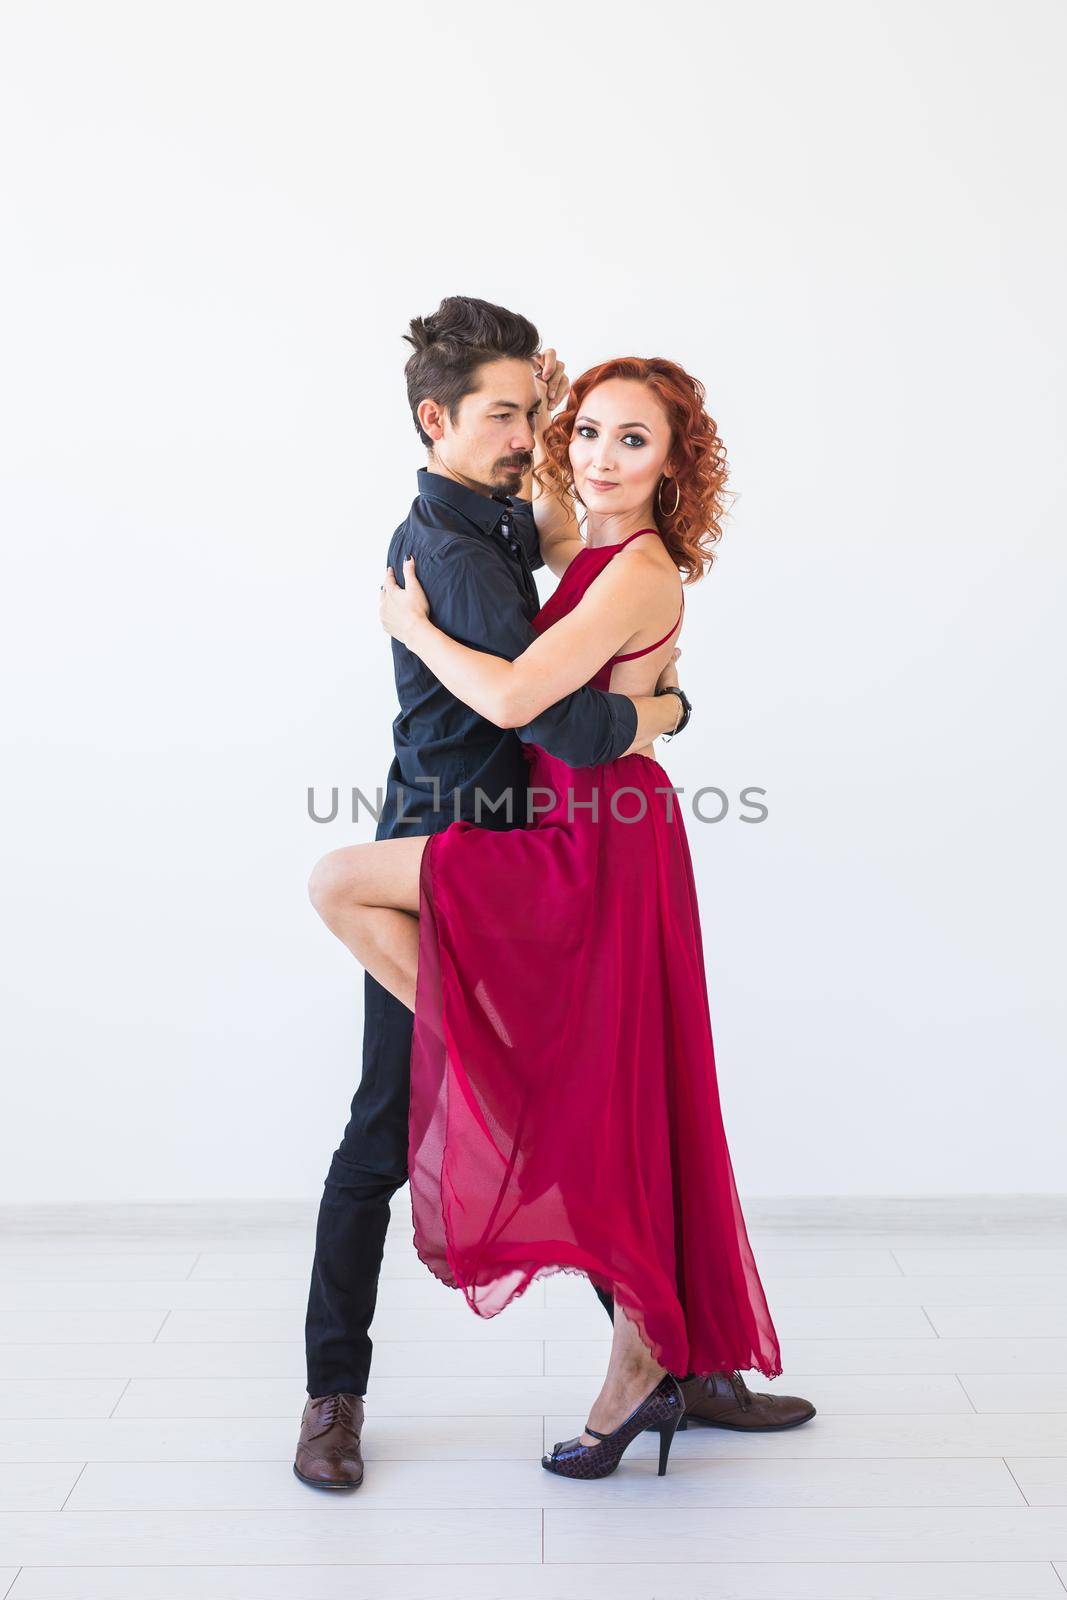 Social dance, bachata, kizomba, salsa, tango concept - Woman dressed in red dress and man in a black costume over white background.